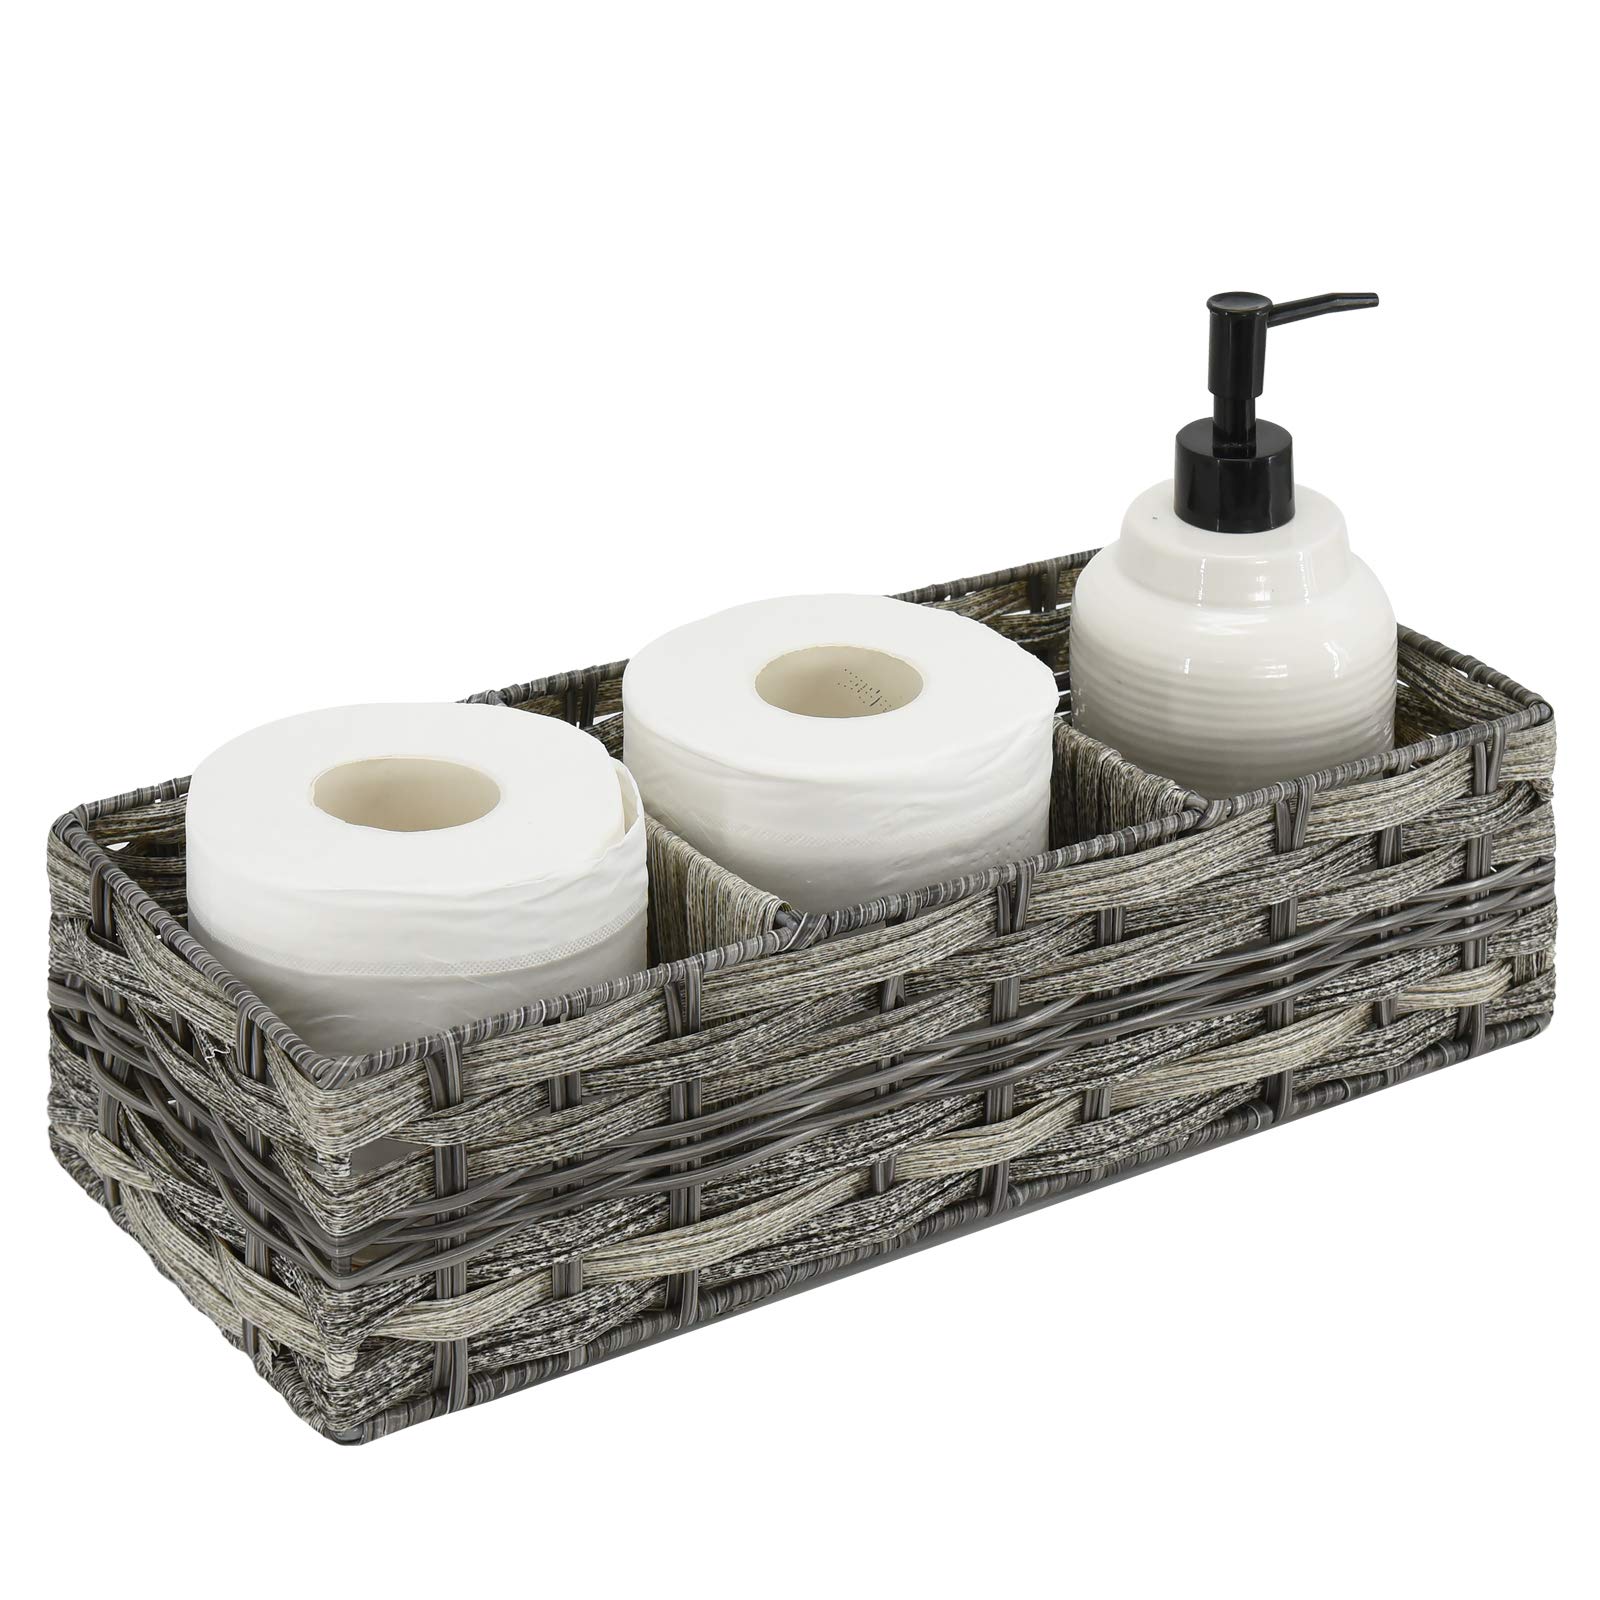 Toilet Paper Storage Basket with 3 Section,Toilet Paper Holder